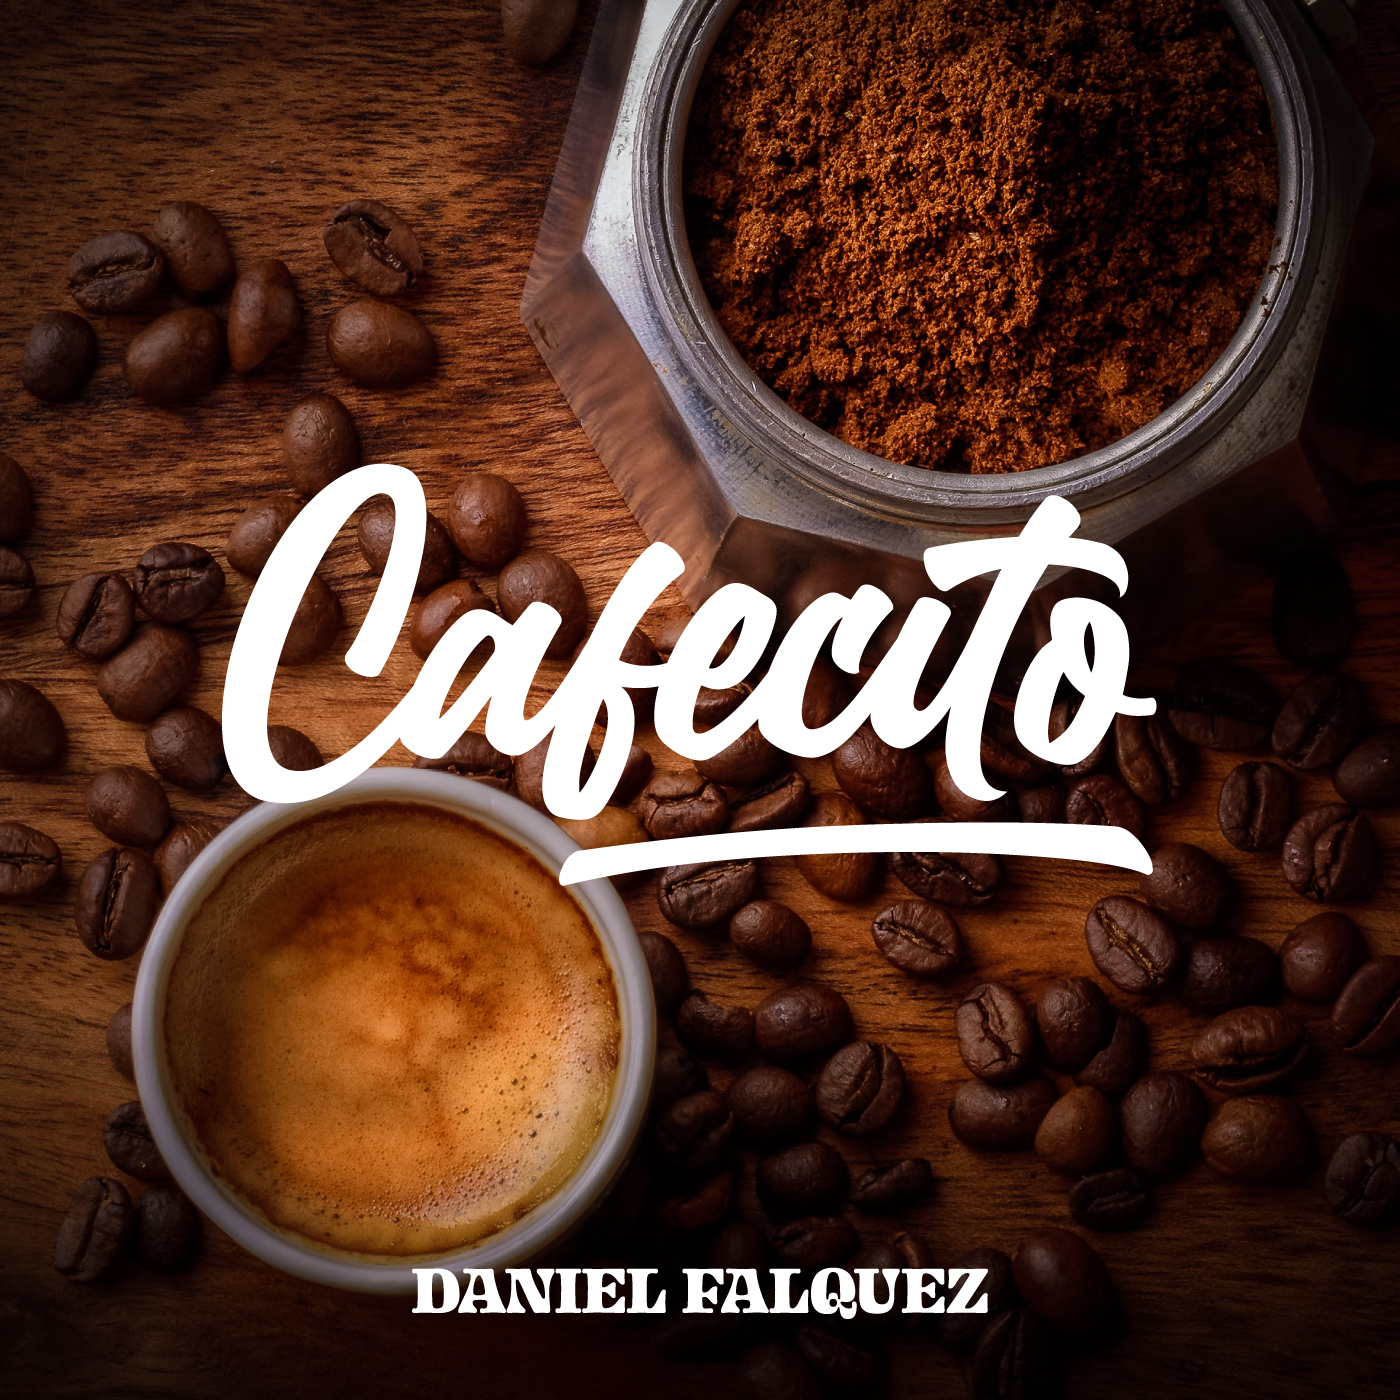 “Cafecito” is a Latin jazz song by Daniel Falquez influenced by the Cuban coffee culture in Miami. This song celebrates the art of roasting, brewing, and sharing a Cuban coffee.